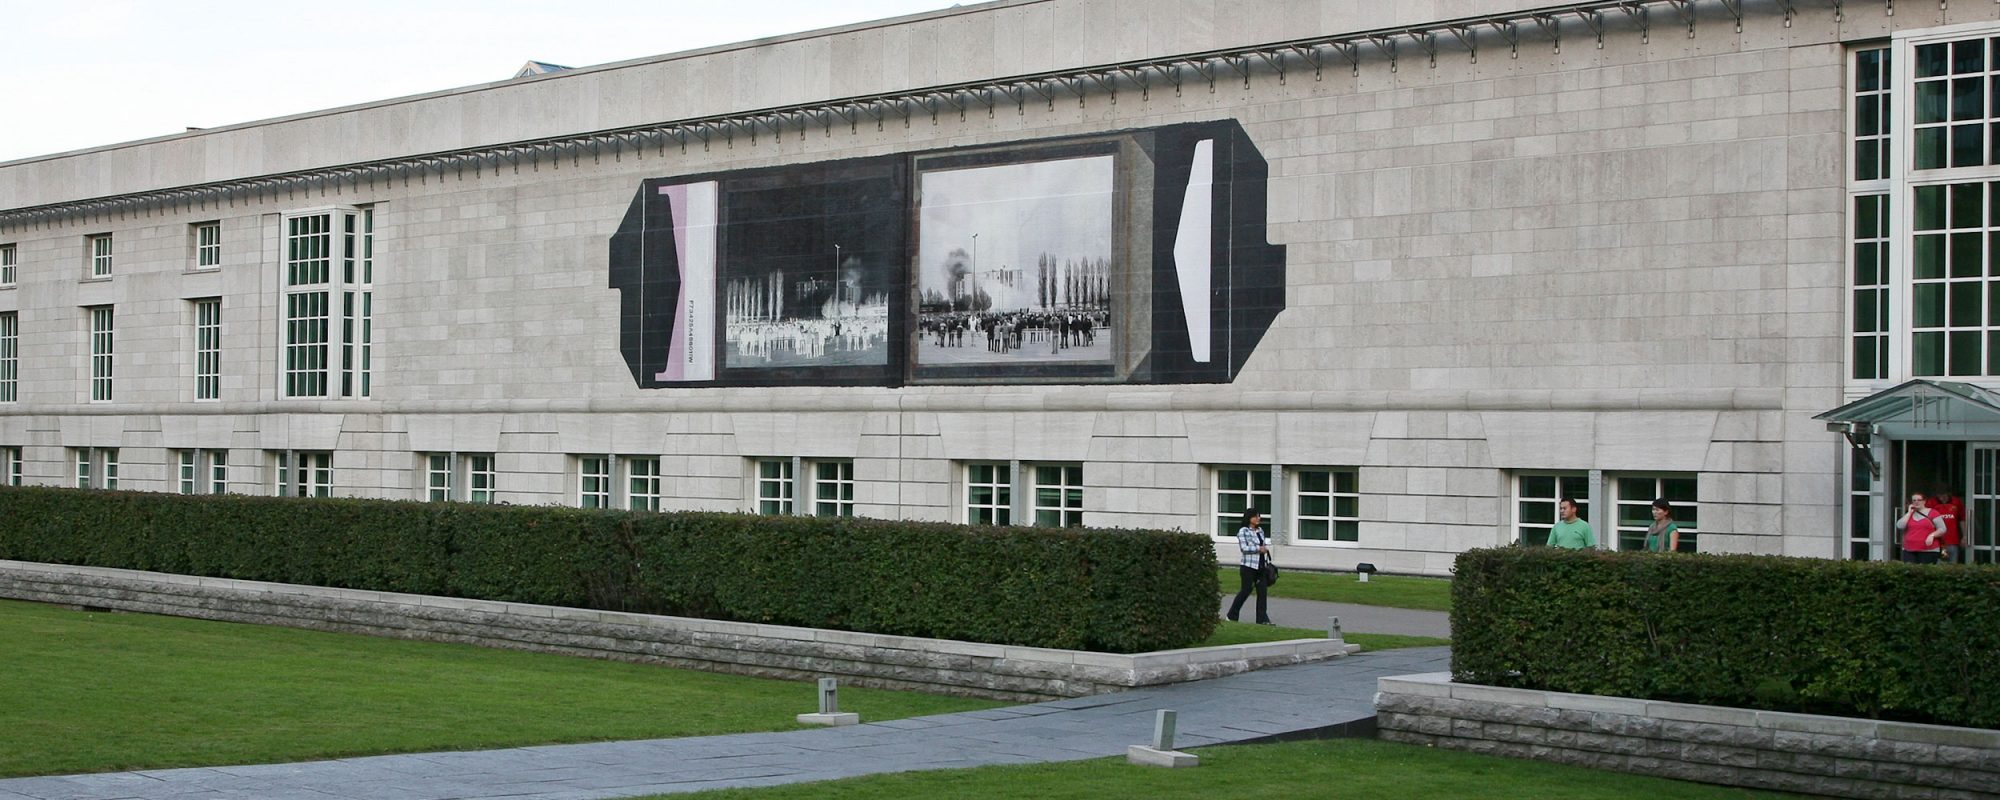 hotographic Proof, Canadian Centre for Architecture, Montreal, 2009